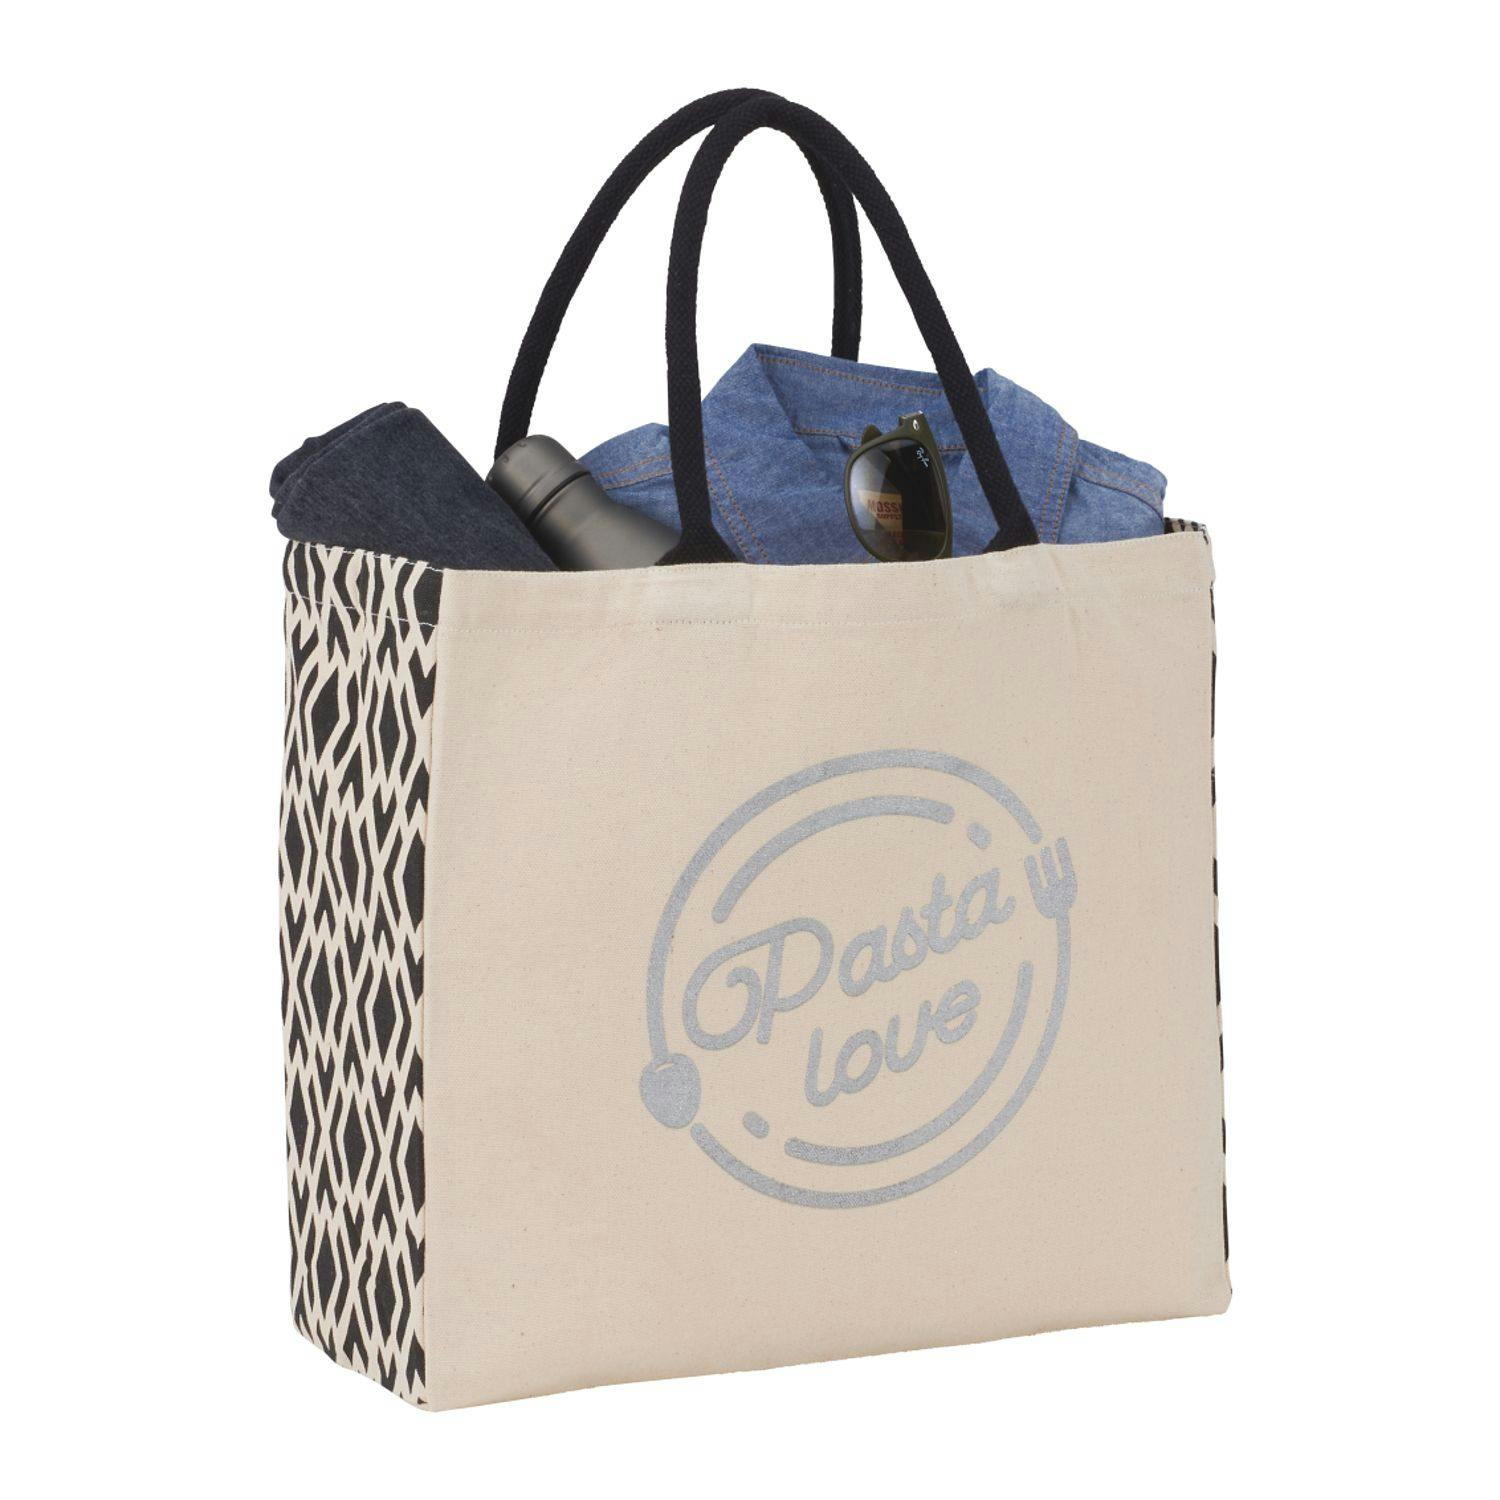 Diamond Gusset Cotton Tote - additional Image 2